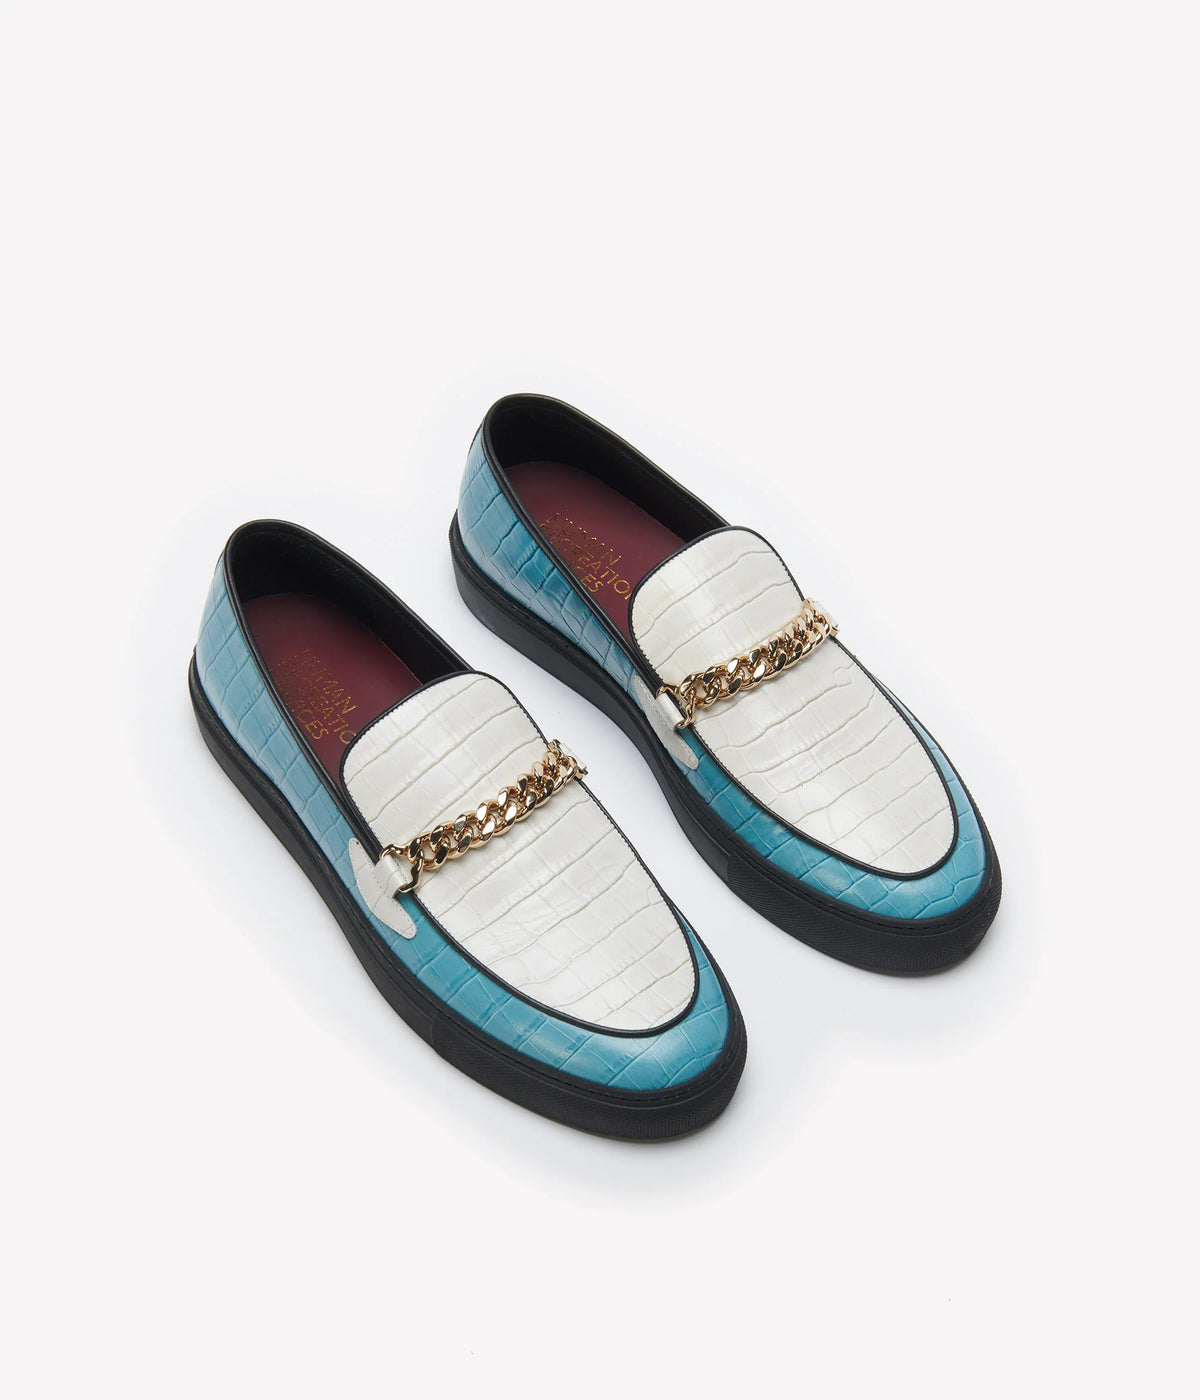 Humean recreational services el dorado loafer made with light blue and white croc leather and gold cuban link chain with black sole. 